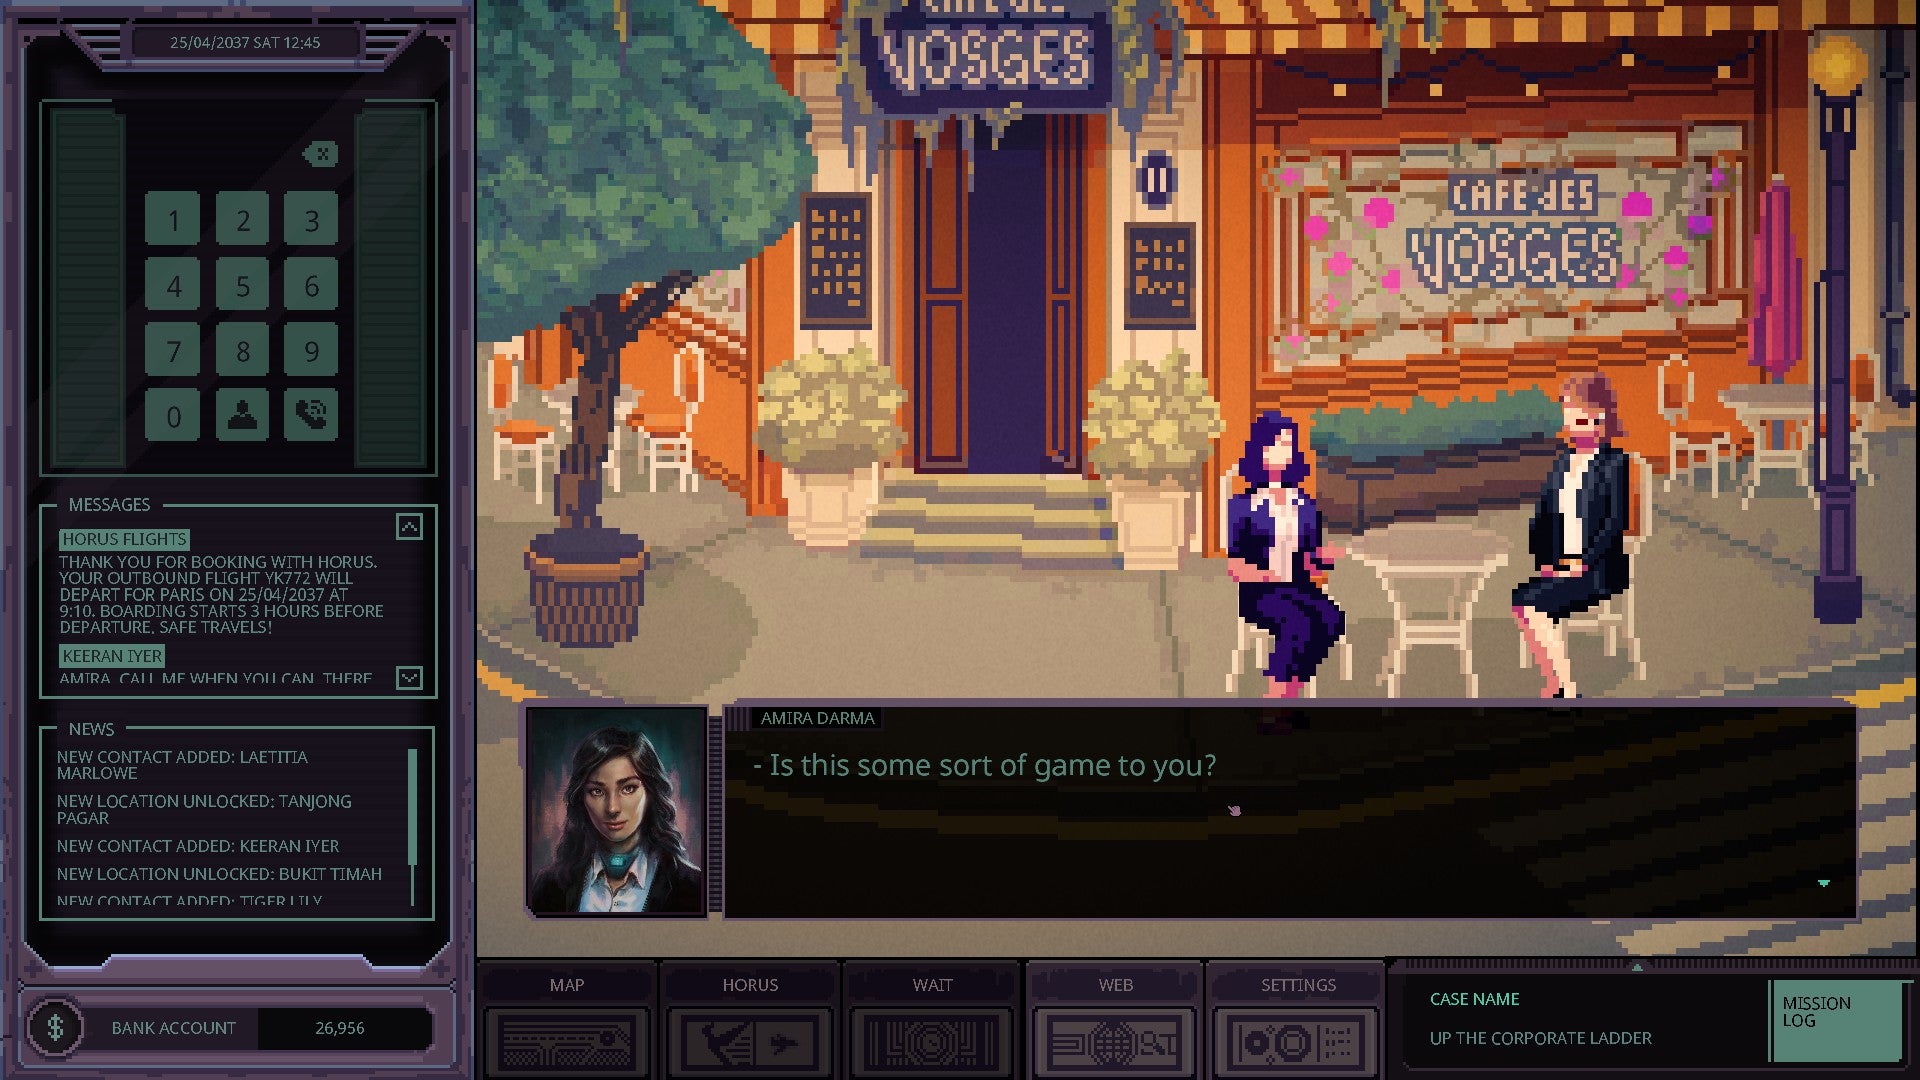 The Chinatown Detective Agency is reviewing screenshots showing the game's left-aligned UI overlay, pixel-art center pane, cyber-noir vistas, and snapshots of detective dialogue.